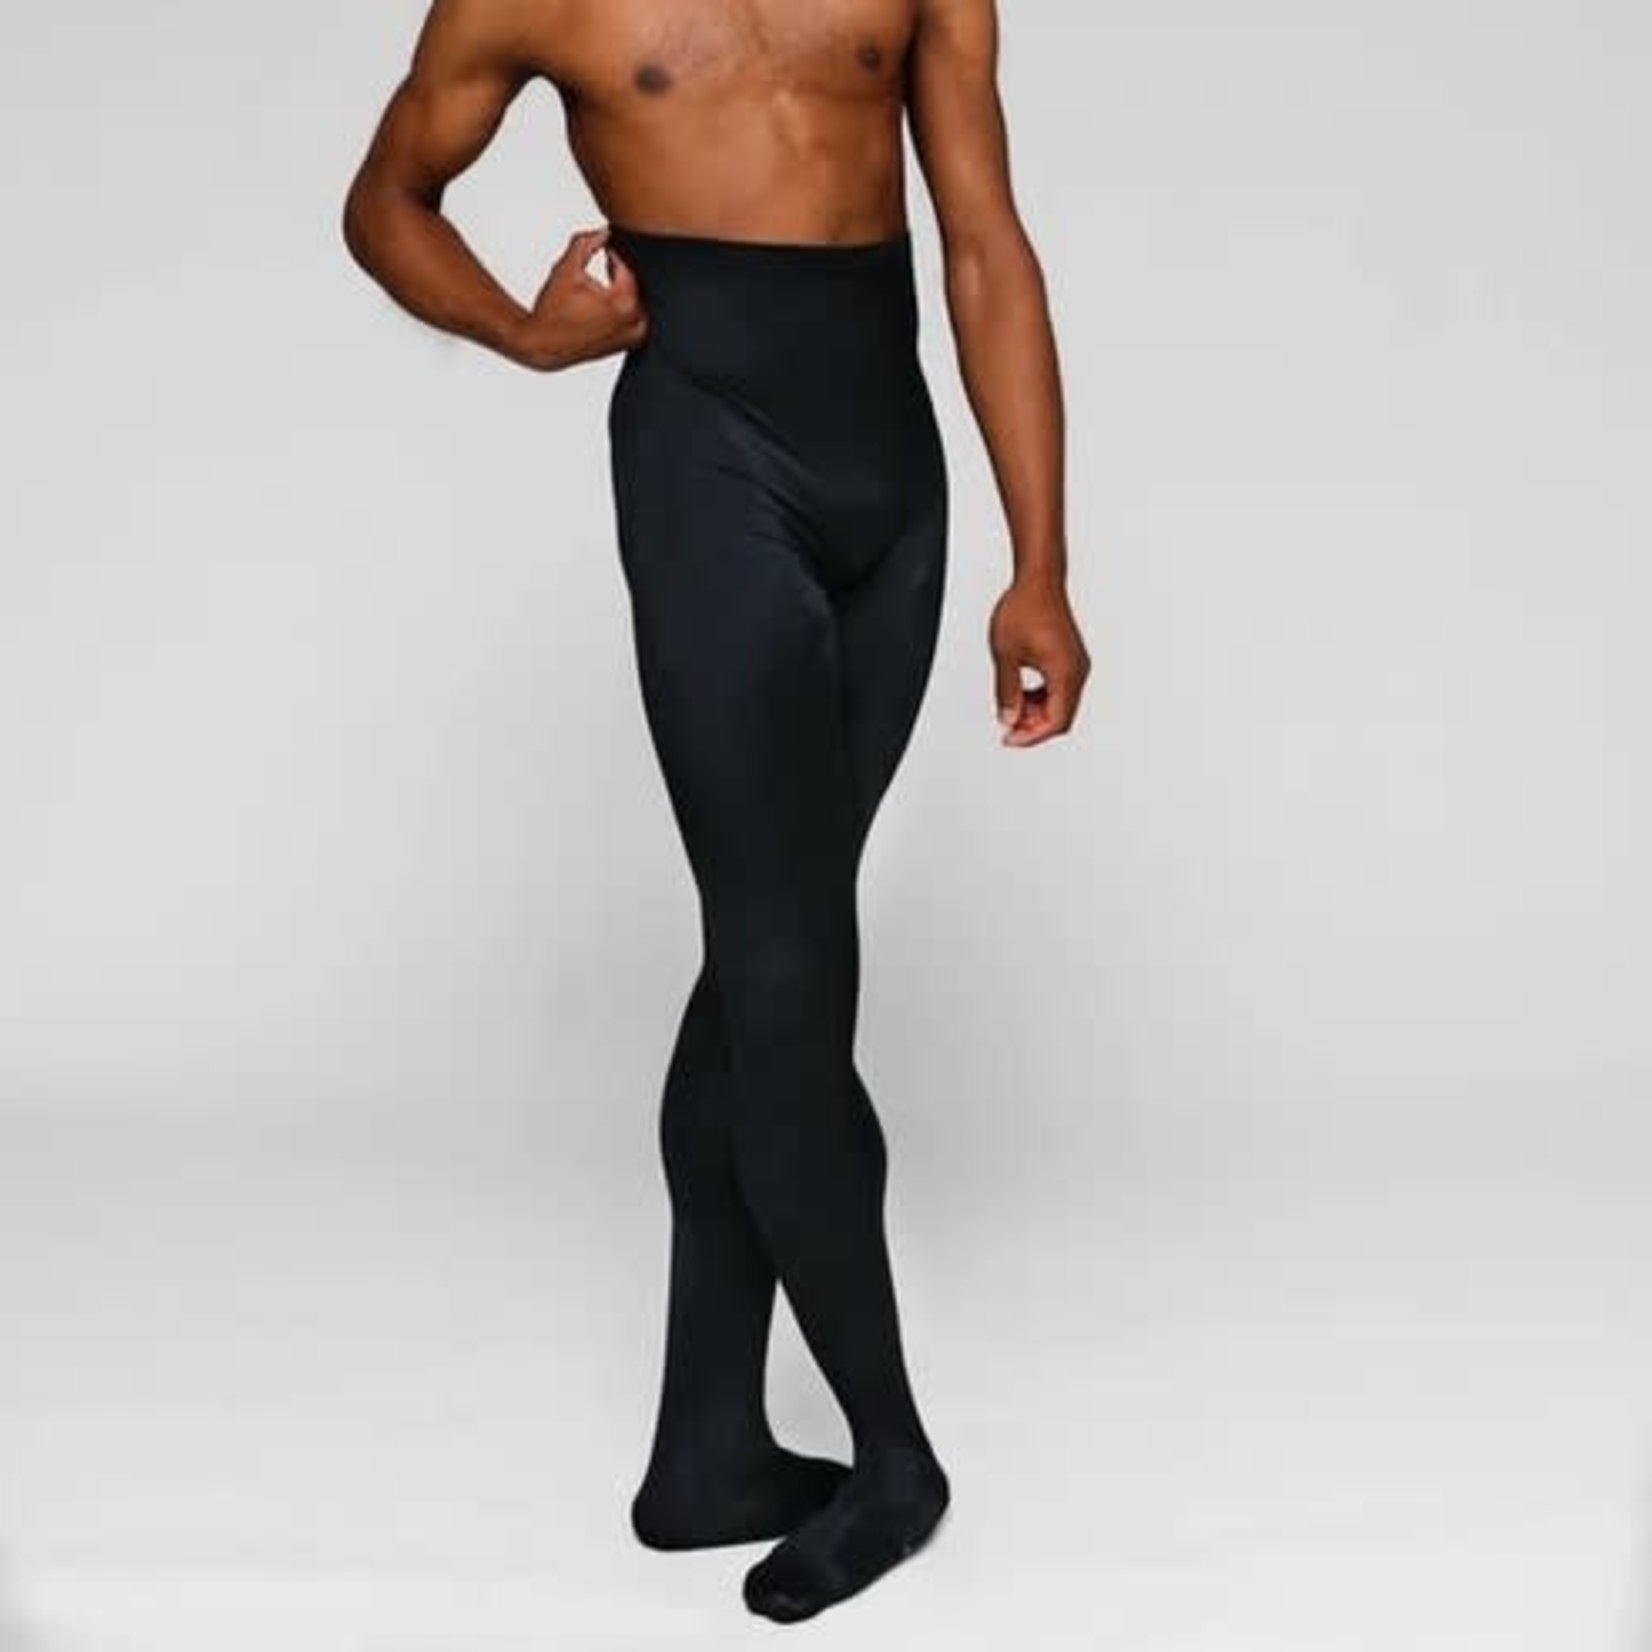 Body Wrappers Body Wrappers M92 Men's Seamless Convertible Tights